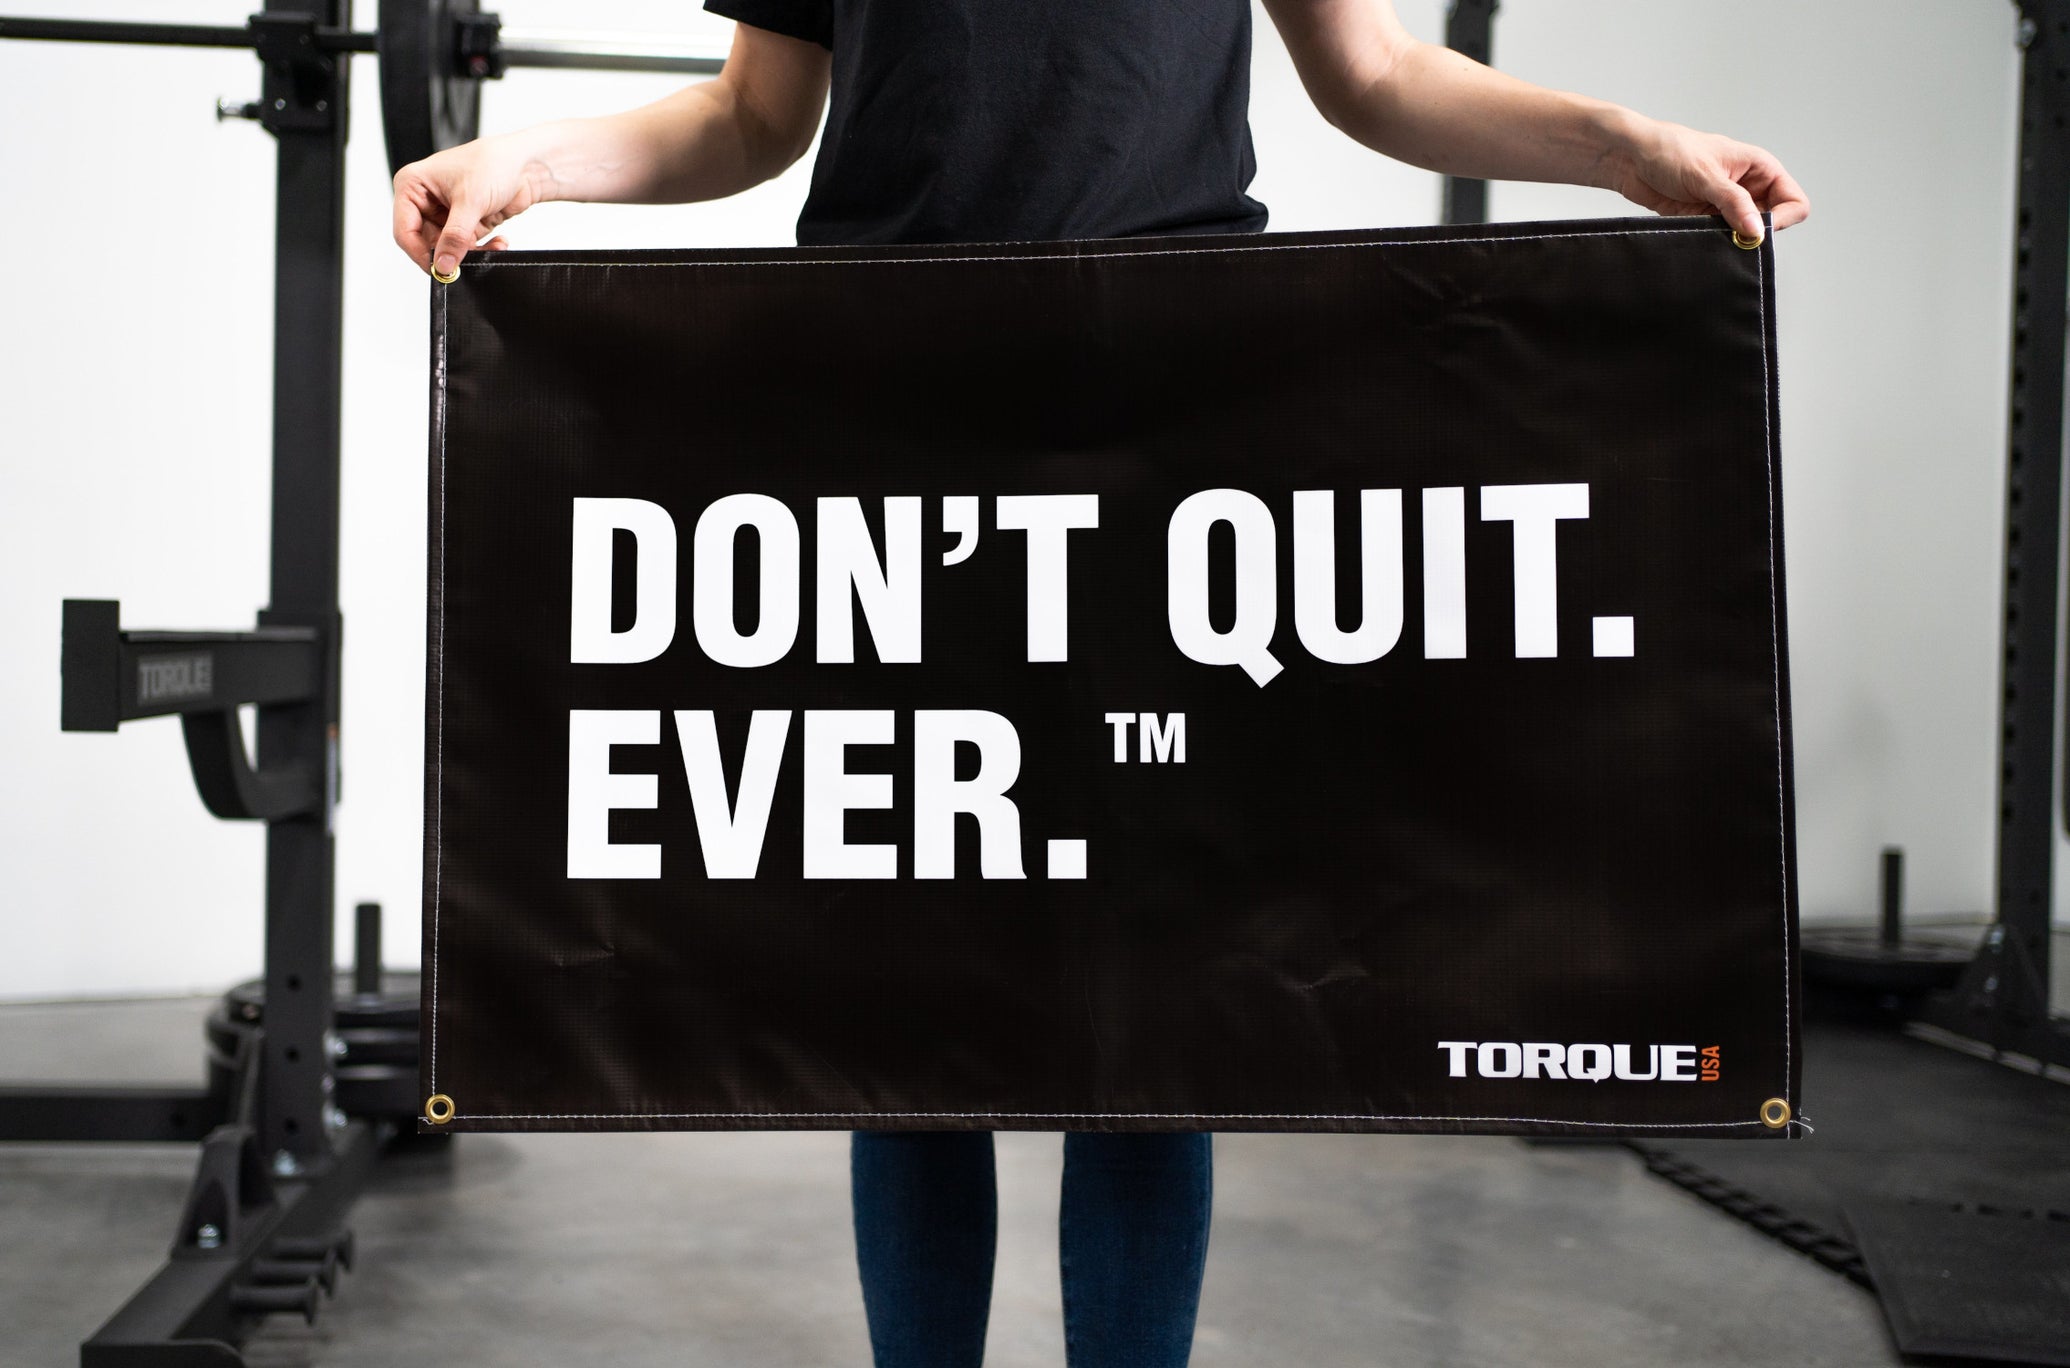 Torque Fitness Slogan "Don't Quit. Ever." Inspirational Gym Banner